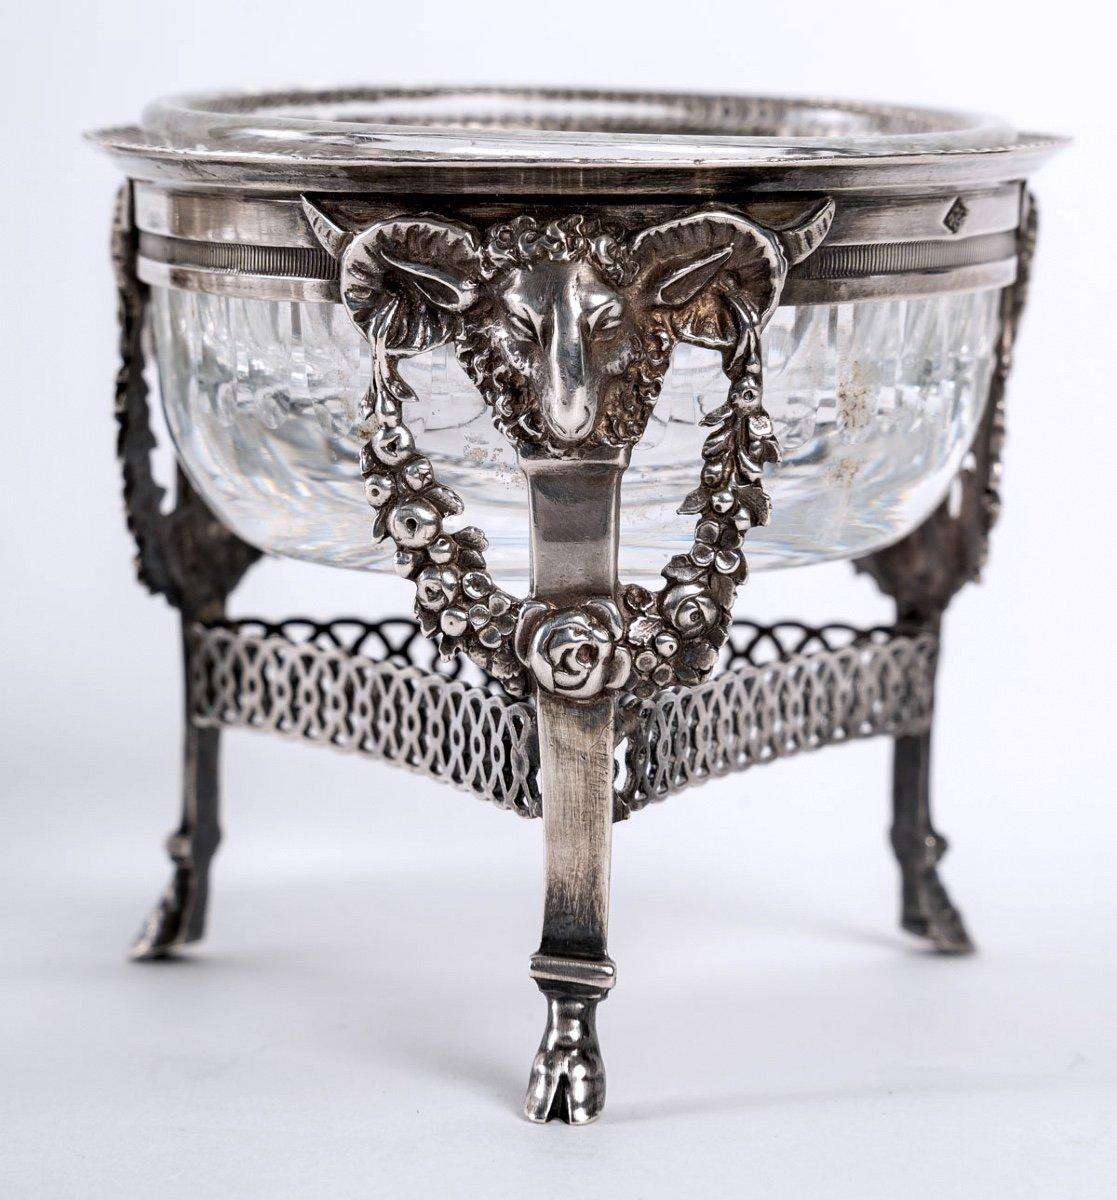 Charming pair of antique silver salverons finely chased on a tripod structure representing rams' heads resting on feet in the shape of sheep's hooves.
The salvers have their original crystal glasses.

Very beautiful work of the first quarter of